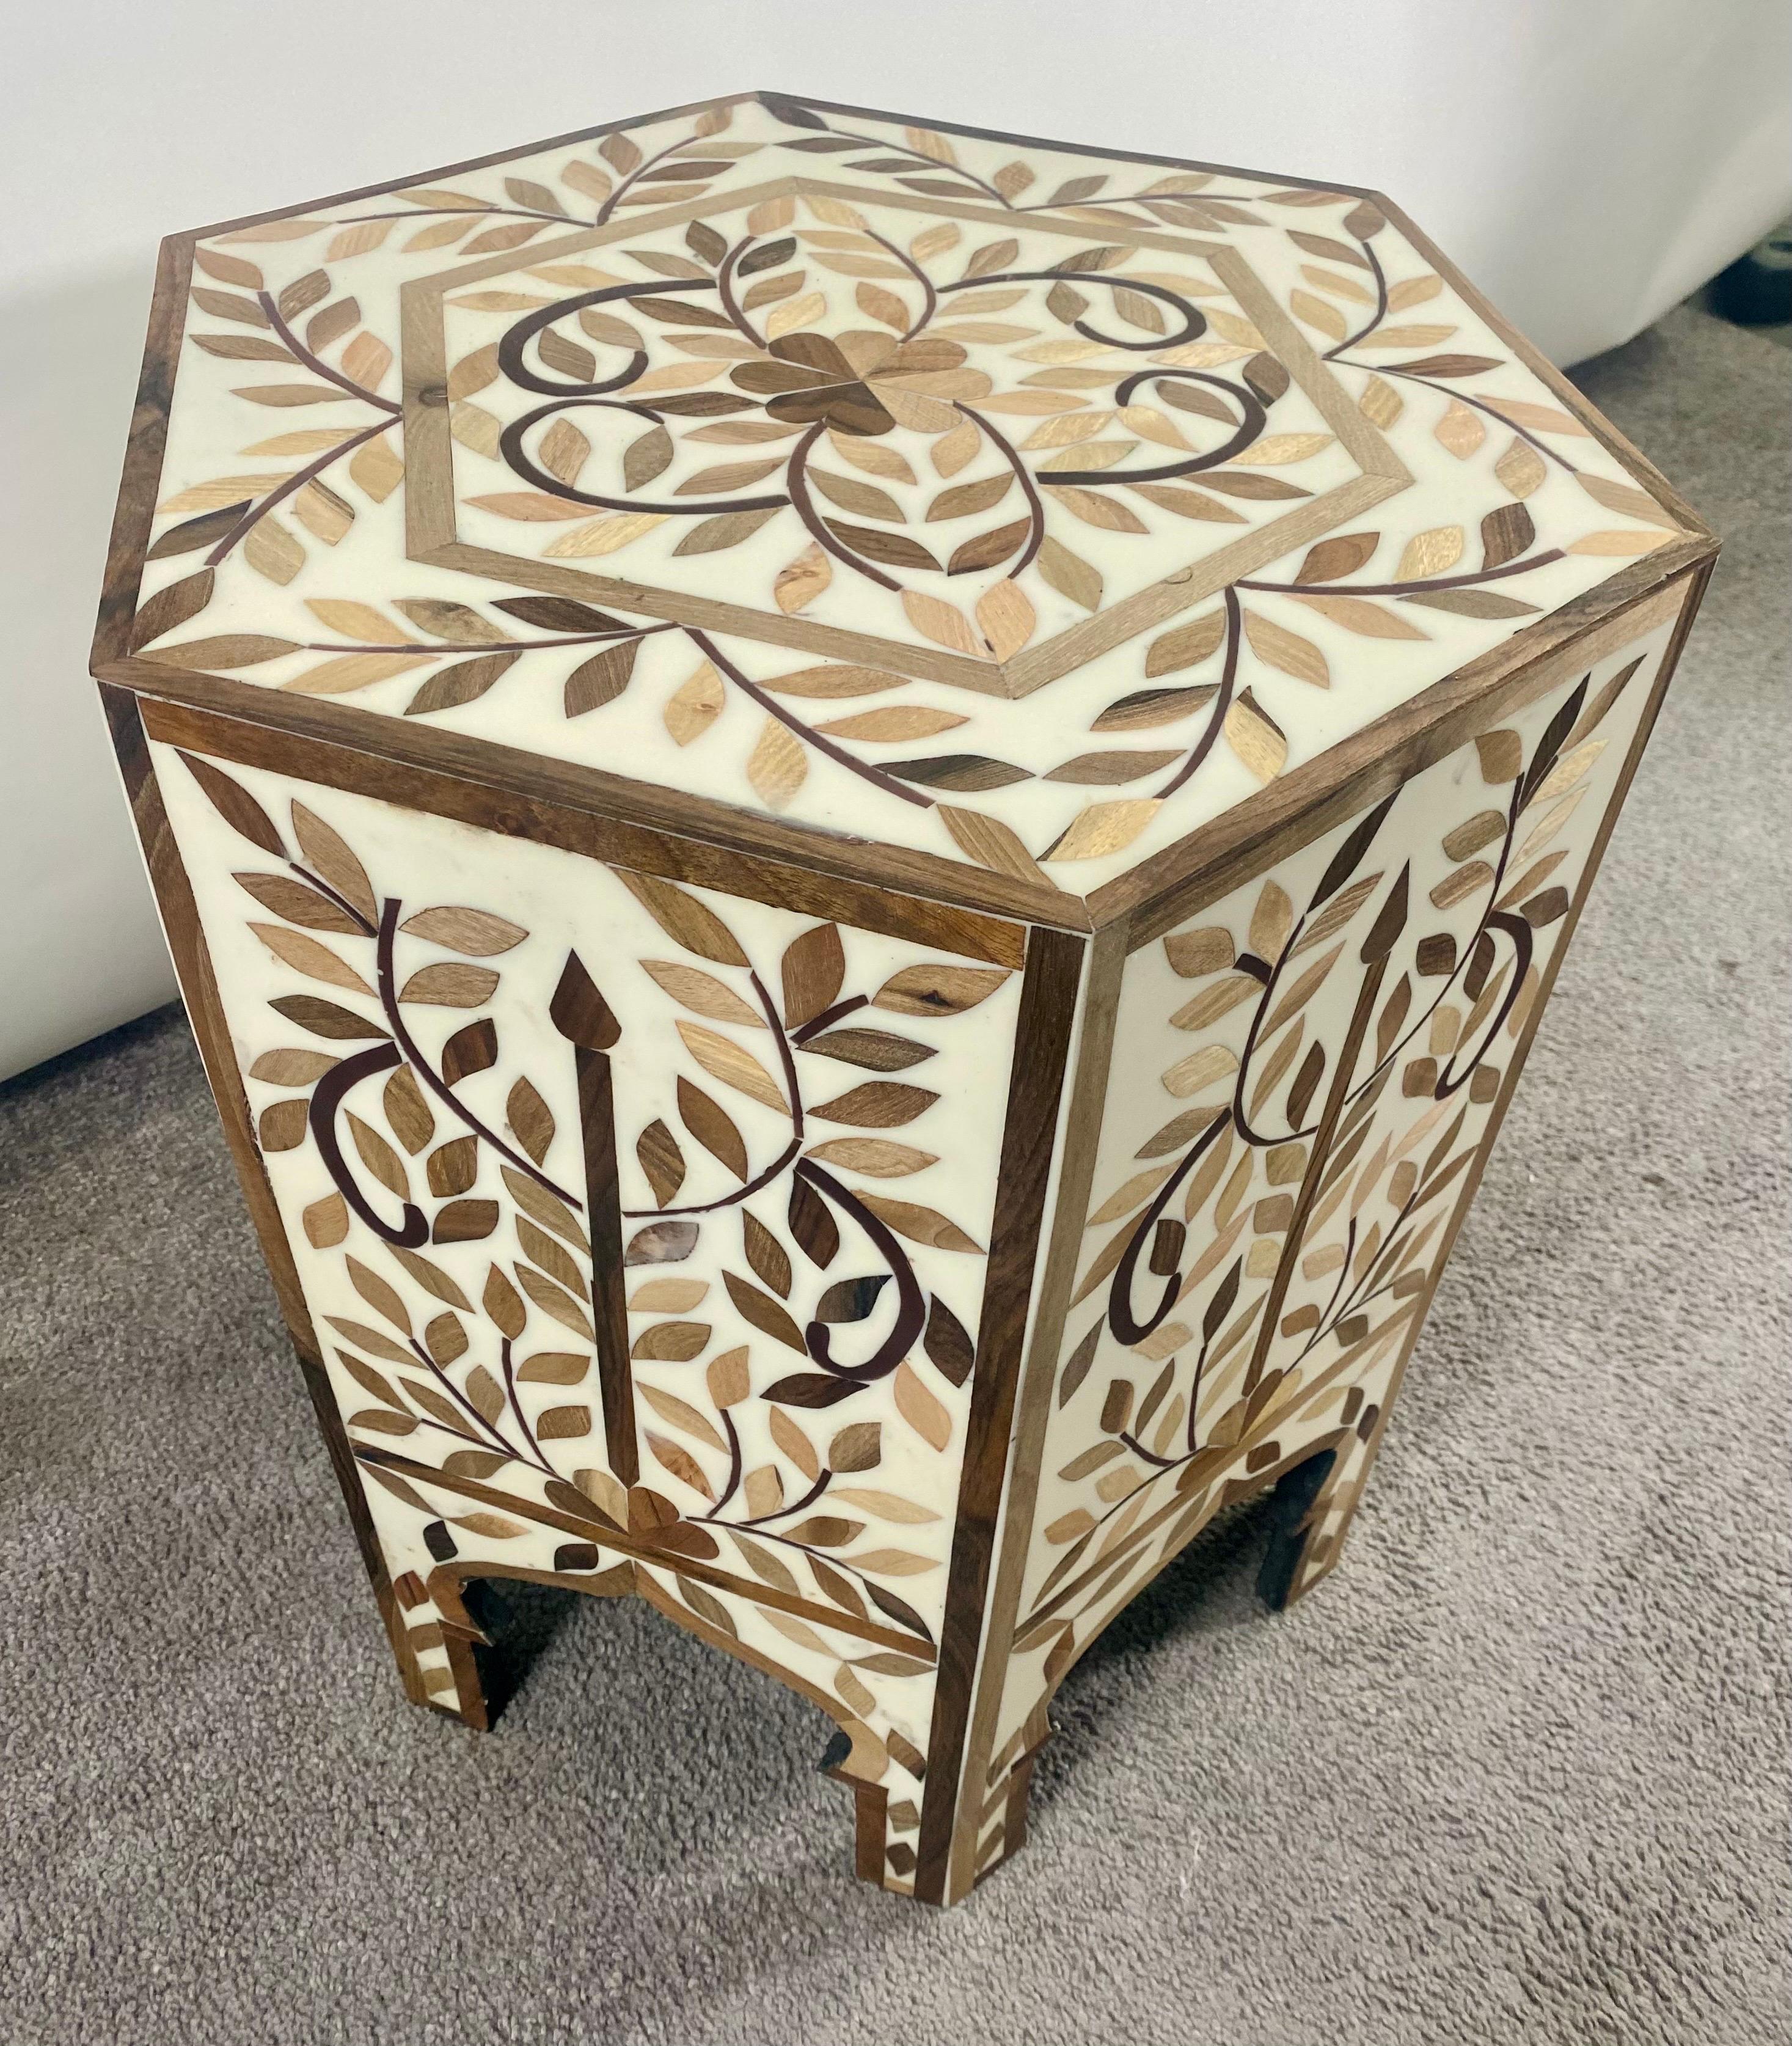 Moroccan Boho Chic Leaf Design Resin & Walnut Hexagonal Side or End Table, Pair In Good Condition For Sale In Plainview, NY